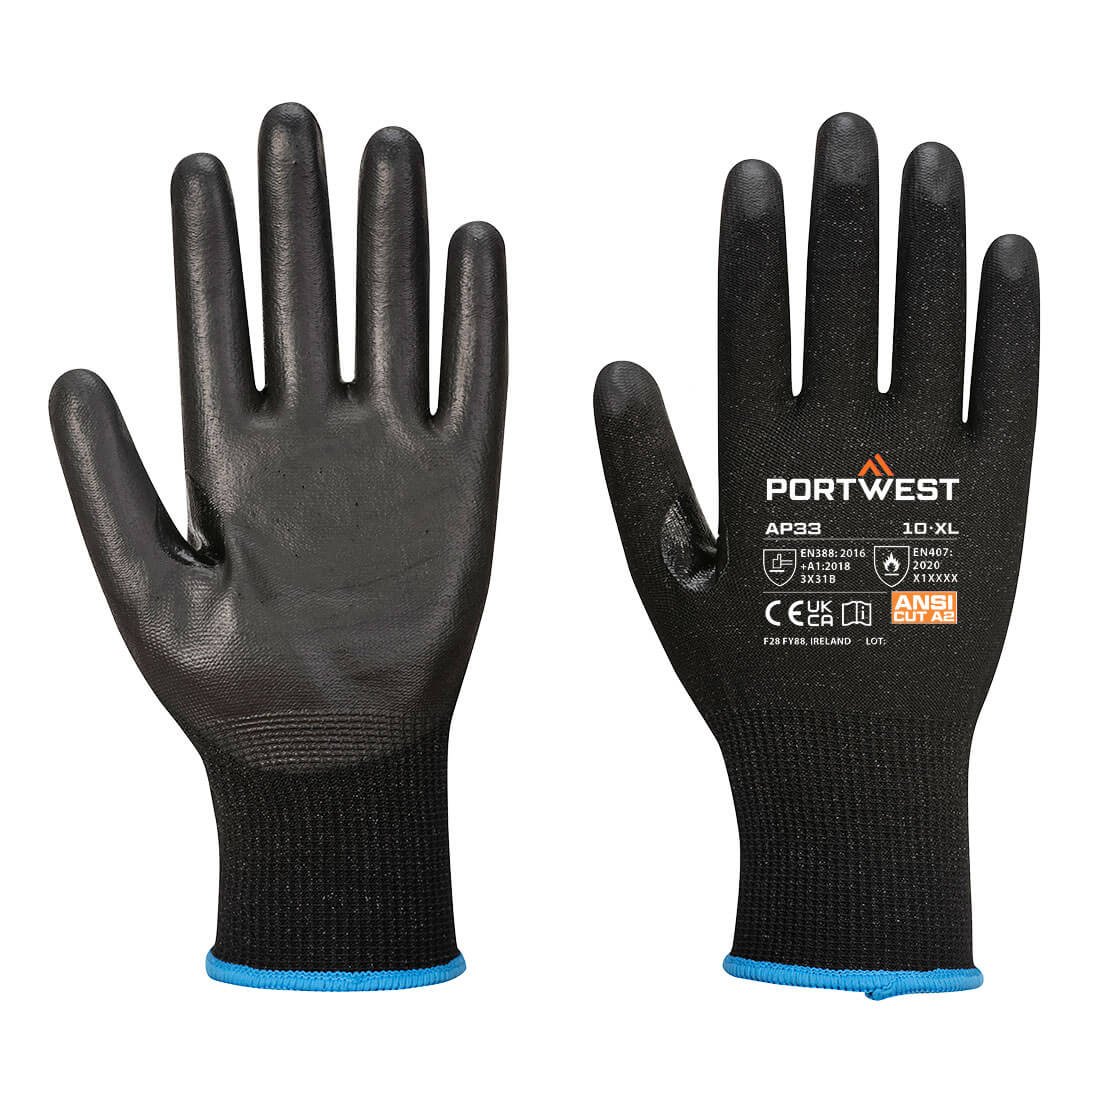 AP33 Portwest® PU Coated Touchscreen A2 Work Gloves